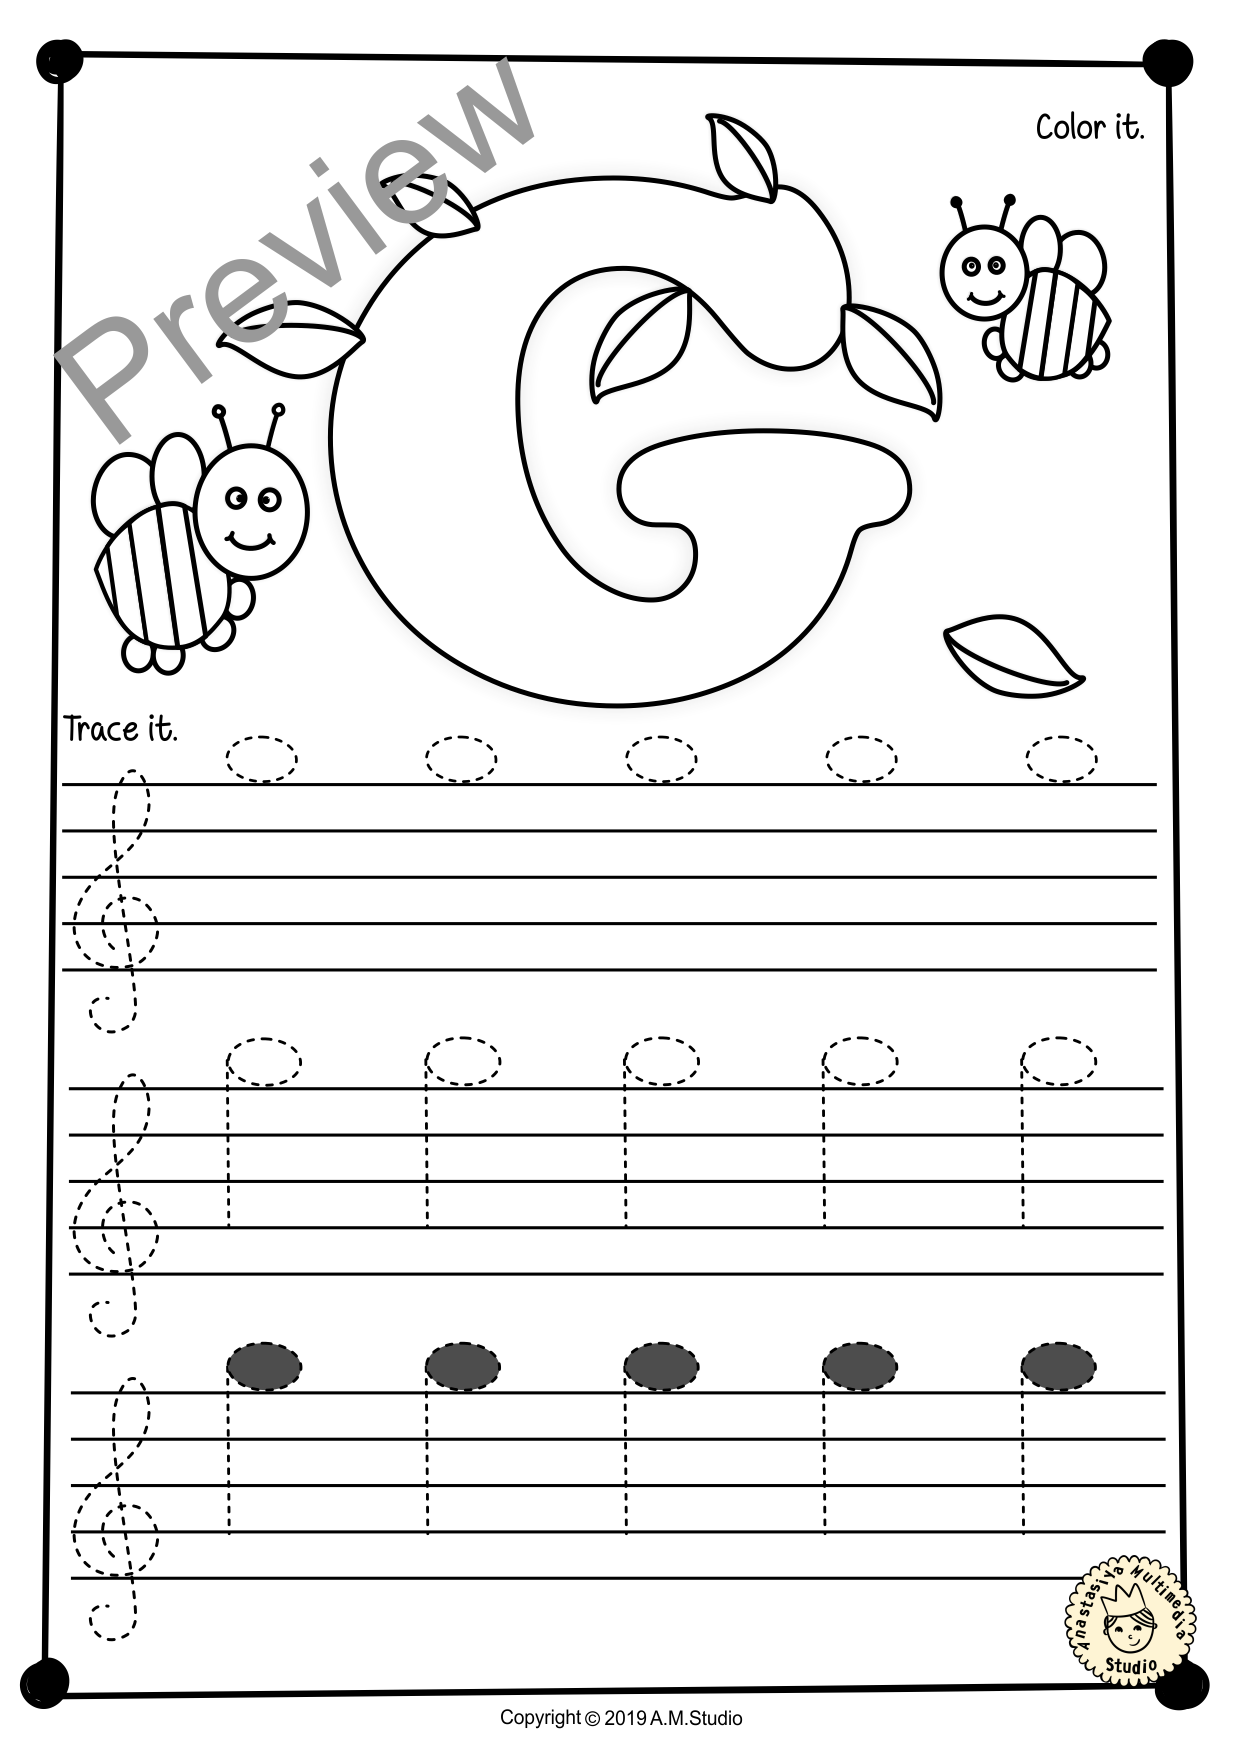 Treble Clef Tracing Music Notes Worksheets for Spring (img # 3)